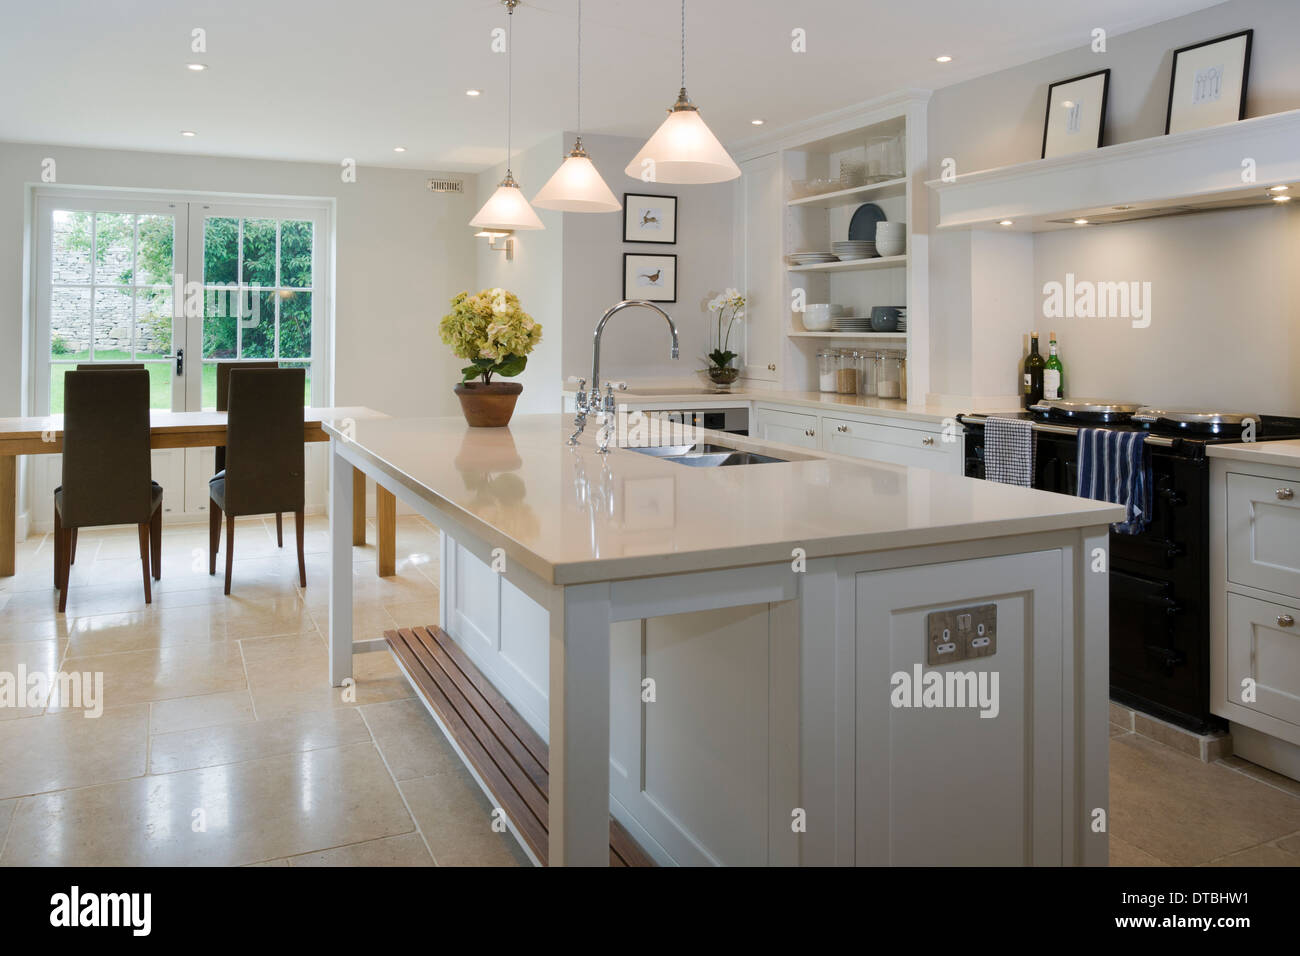 Large island unit in a bright light kitchen with dining area beyond. Stock Photo